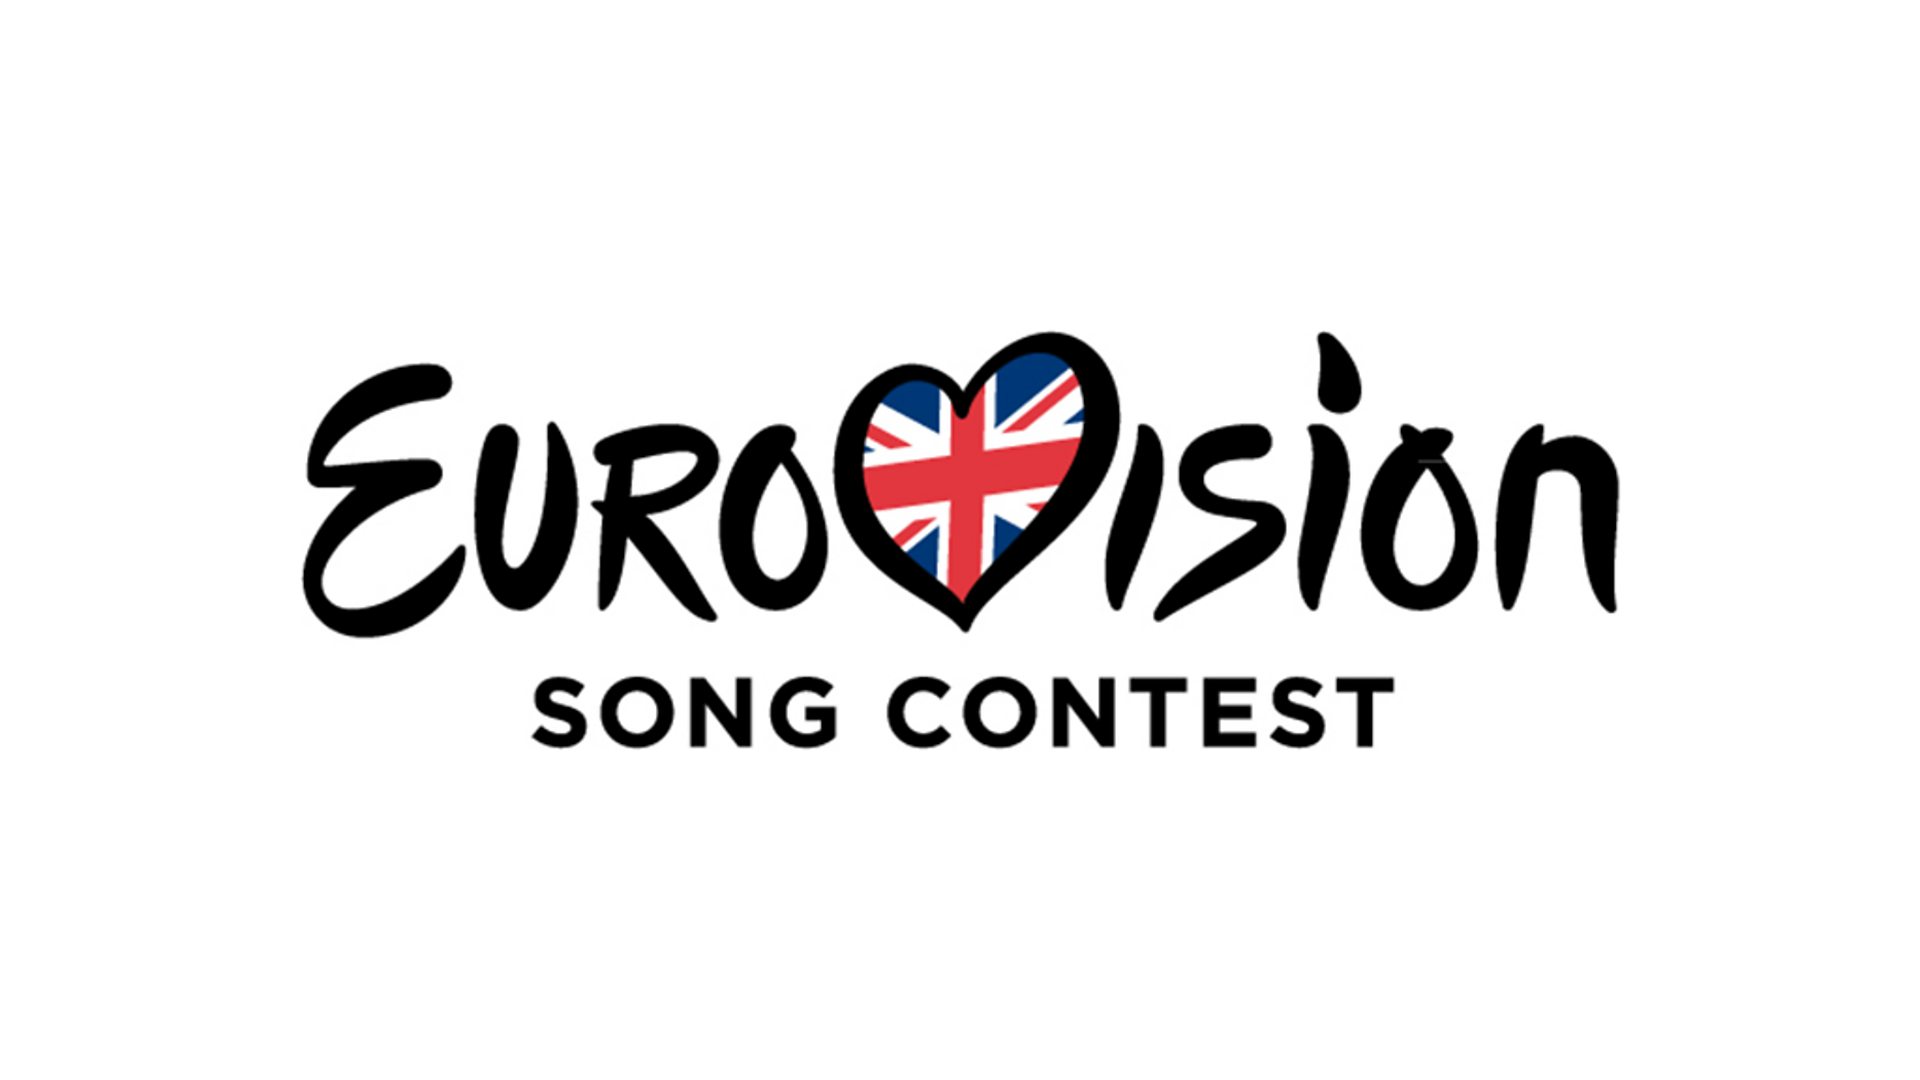 United Kingdom participation in the Eurovision Song Contest 2024 is